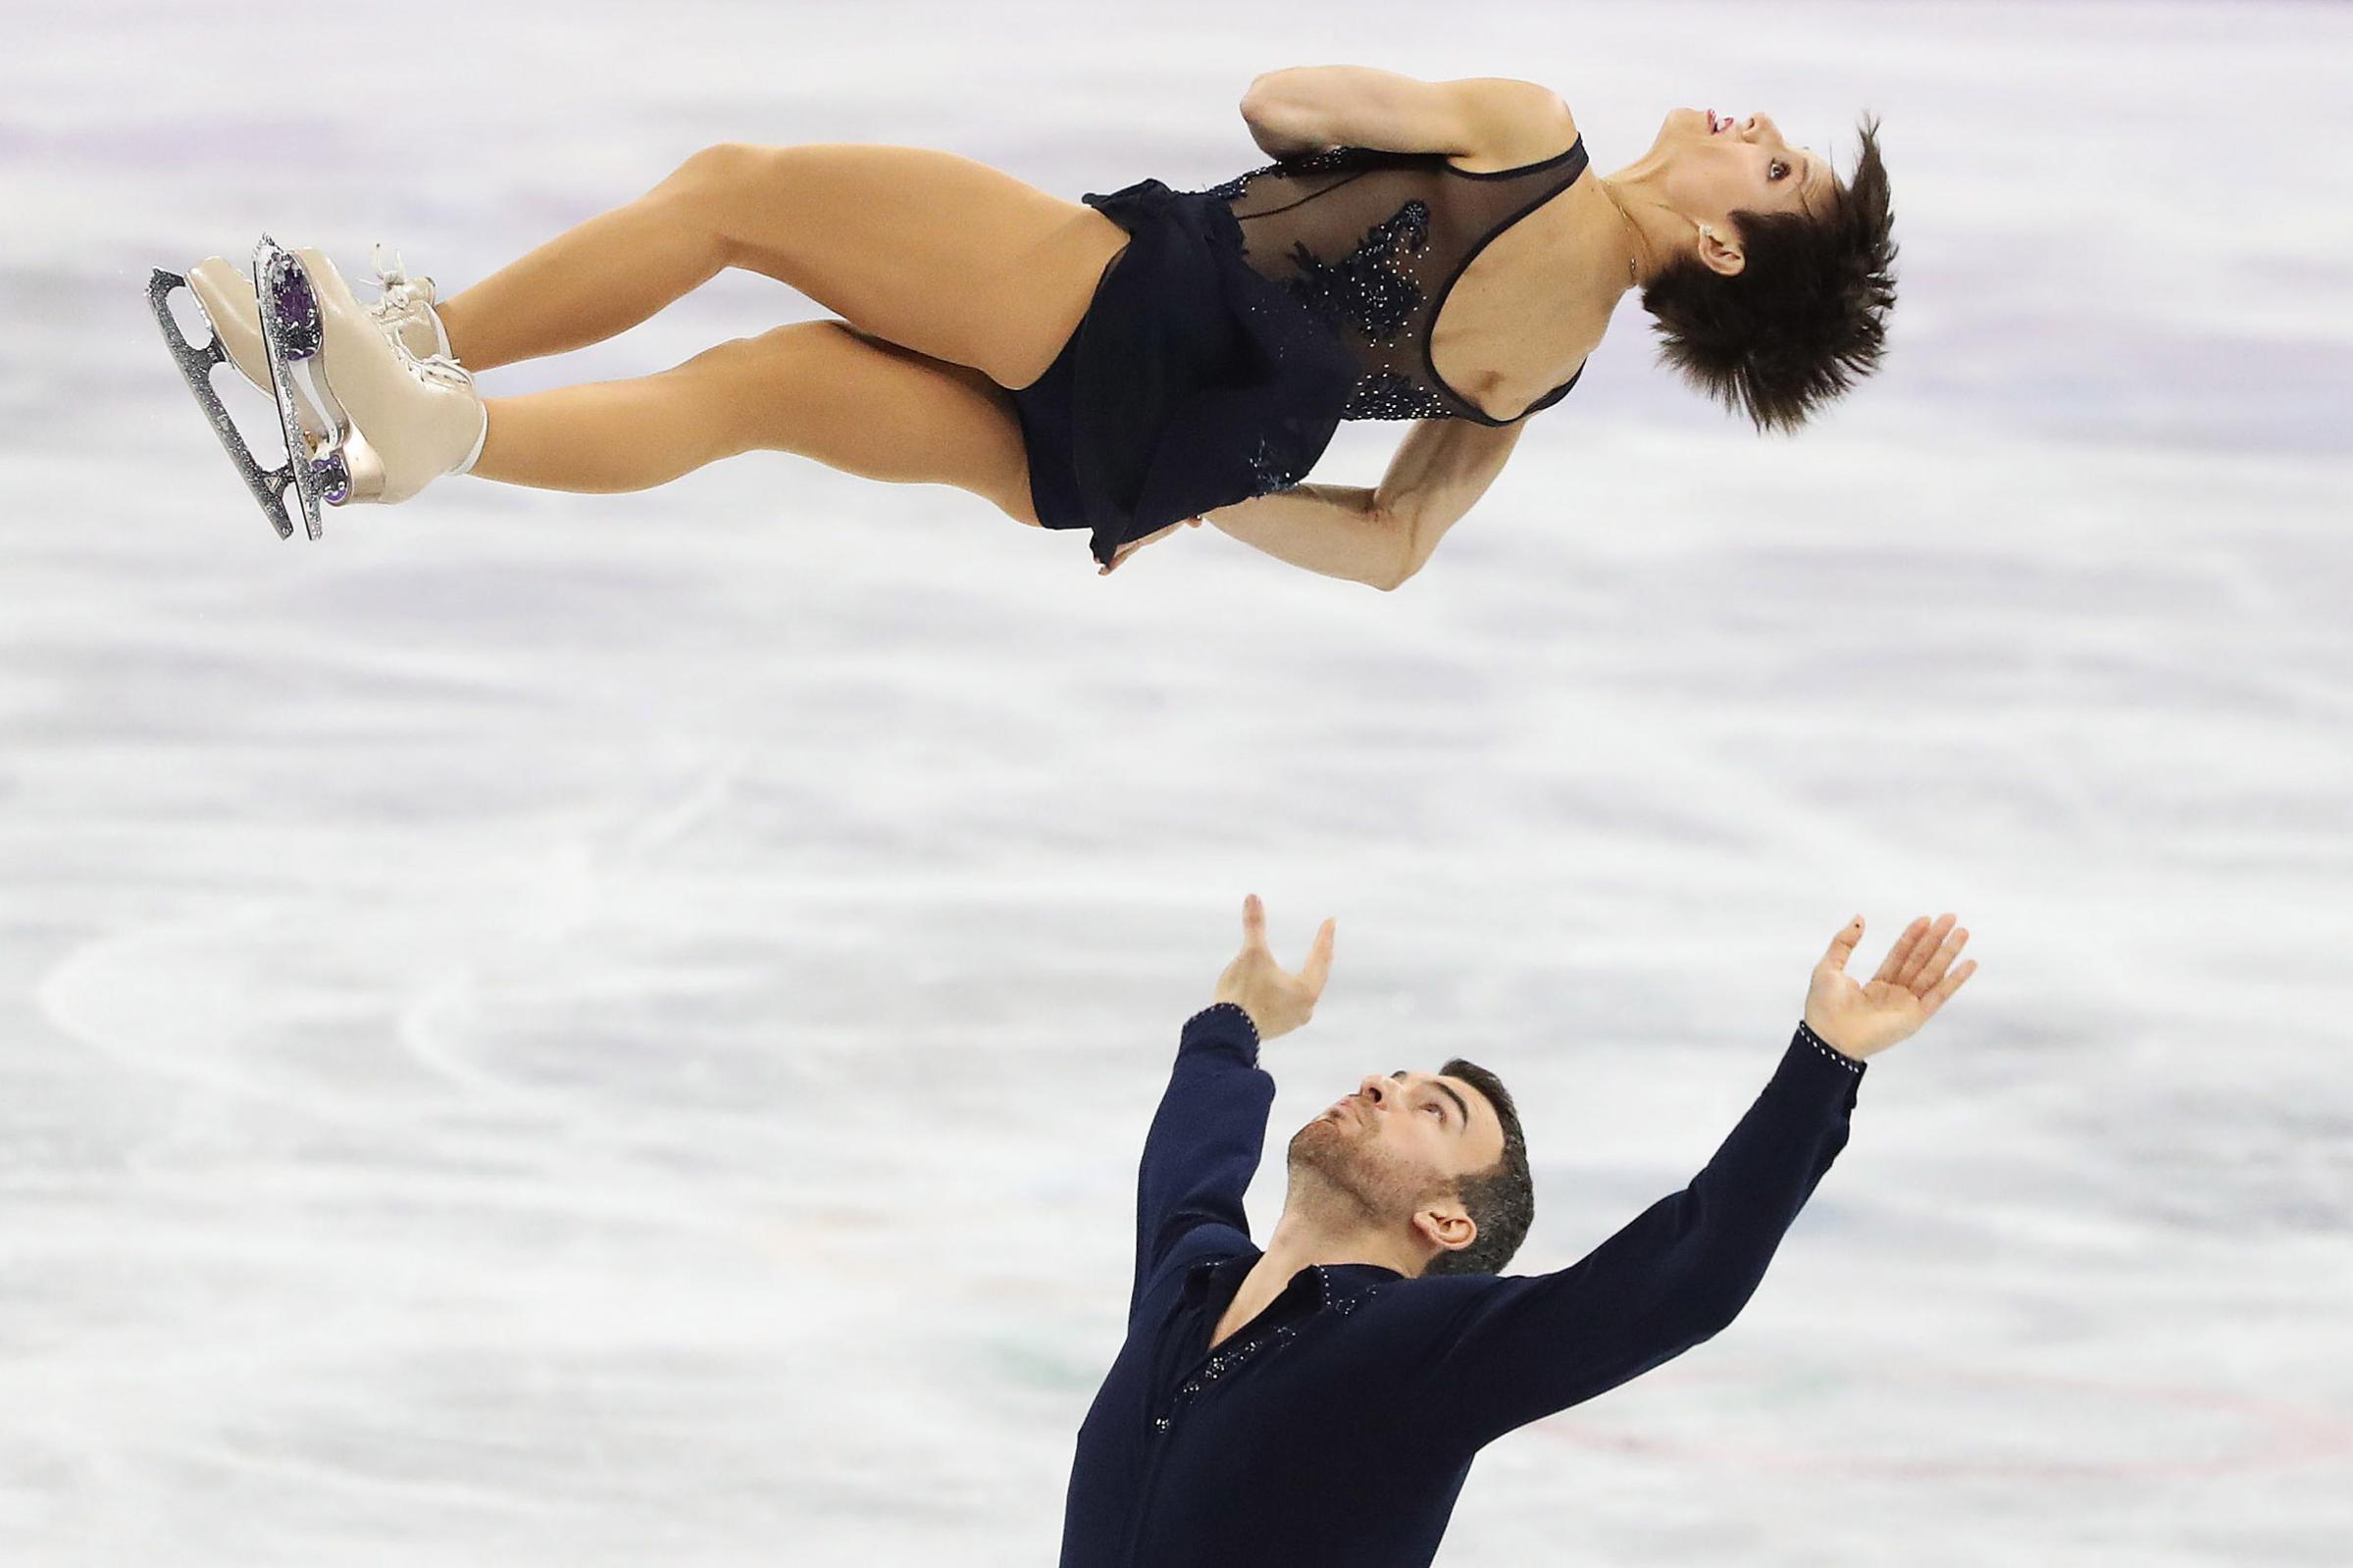 Meagan Duhamel and Eric Radford of Canada perform in the Figure Skating Pairs Short program at the PyeongChang 2018 Winter Olympics at the Gangneung Ice Arena in Gangneung in Pyeongchang in South Korea on Feb. 14, 2018.